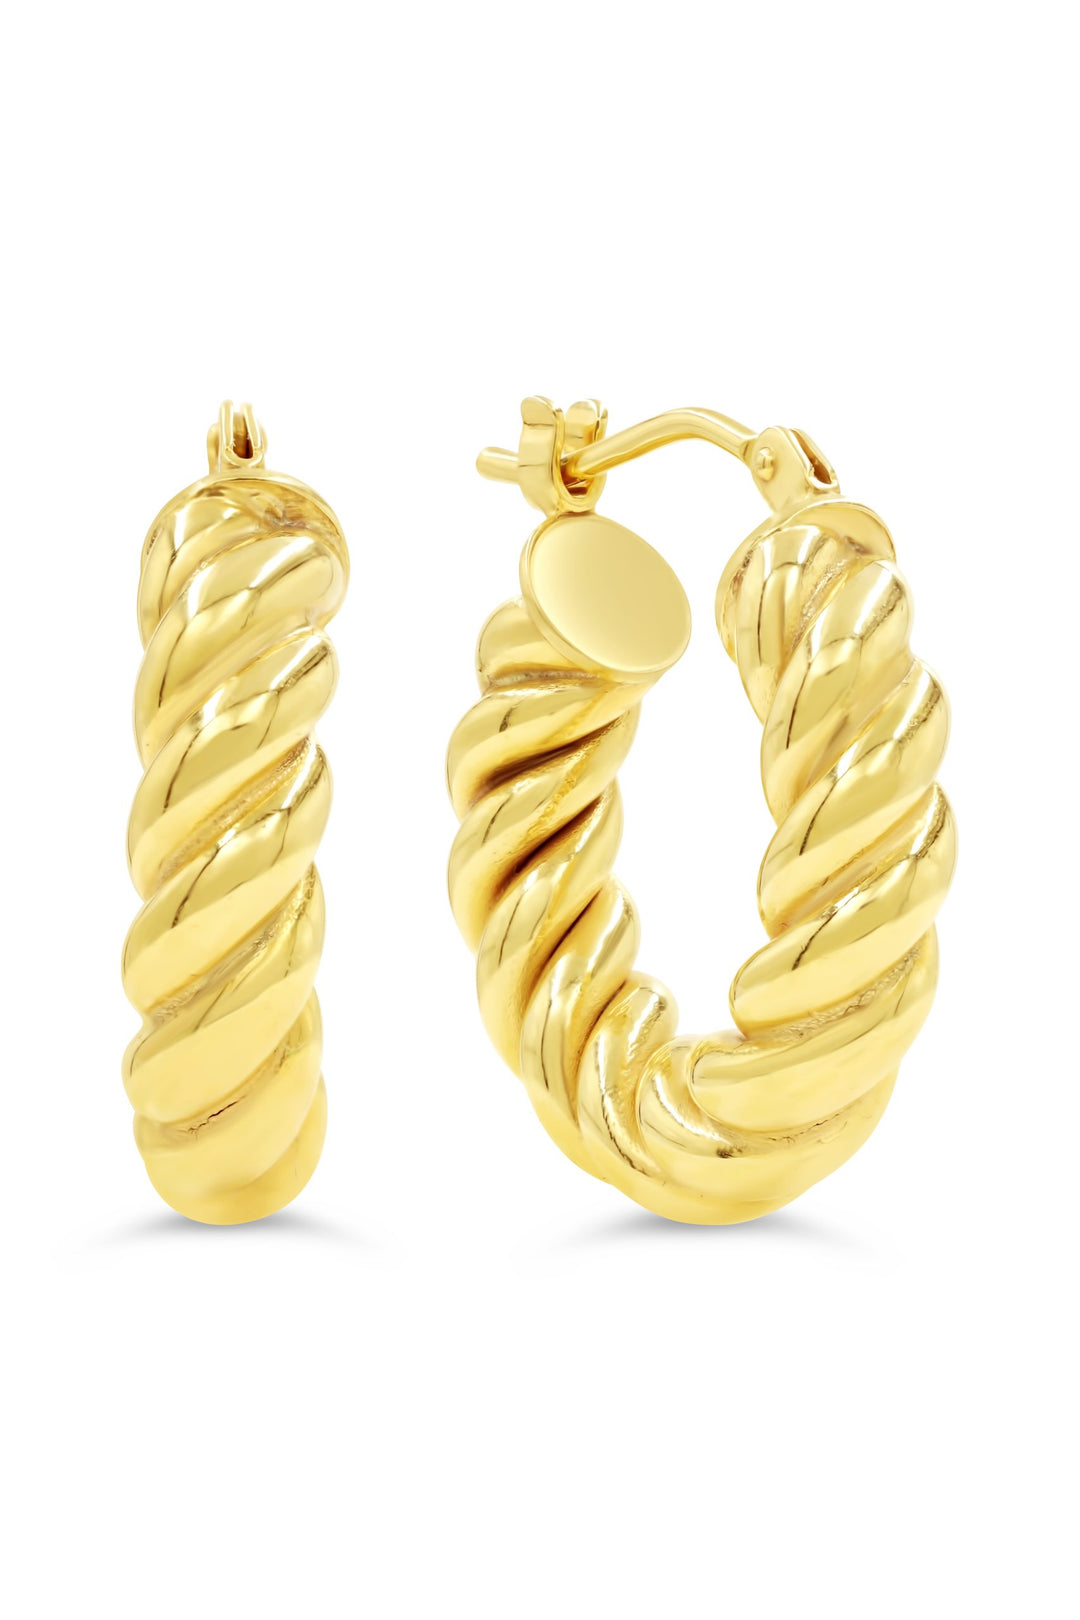 Elegant 10K yellow gold hoop earrings with a unique twisted design, polished to a high shine, adding a luxurious touch to any outfit.